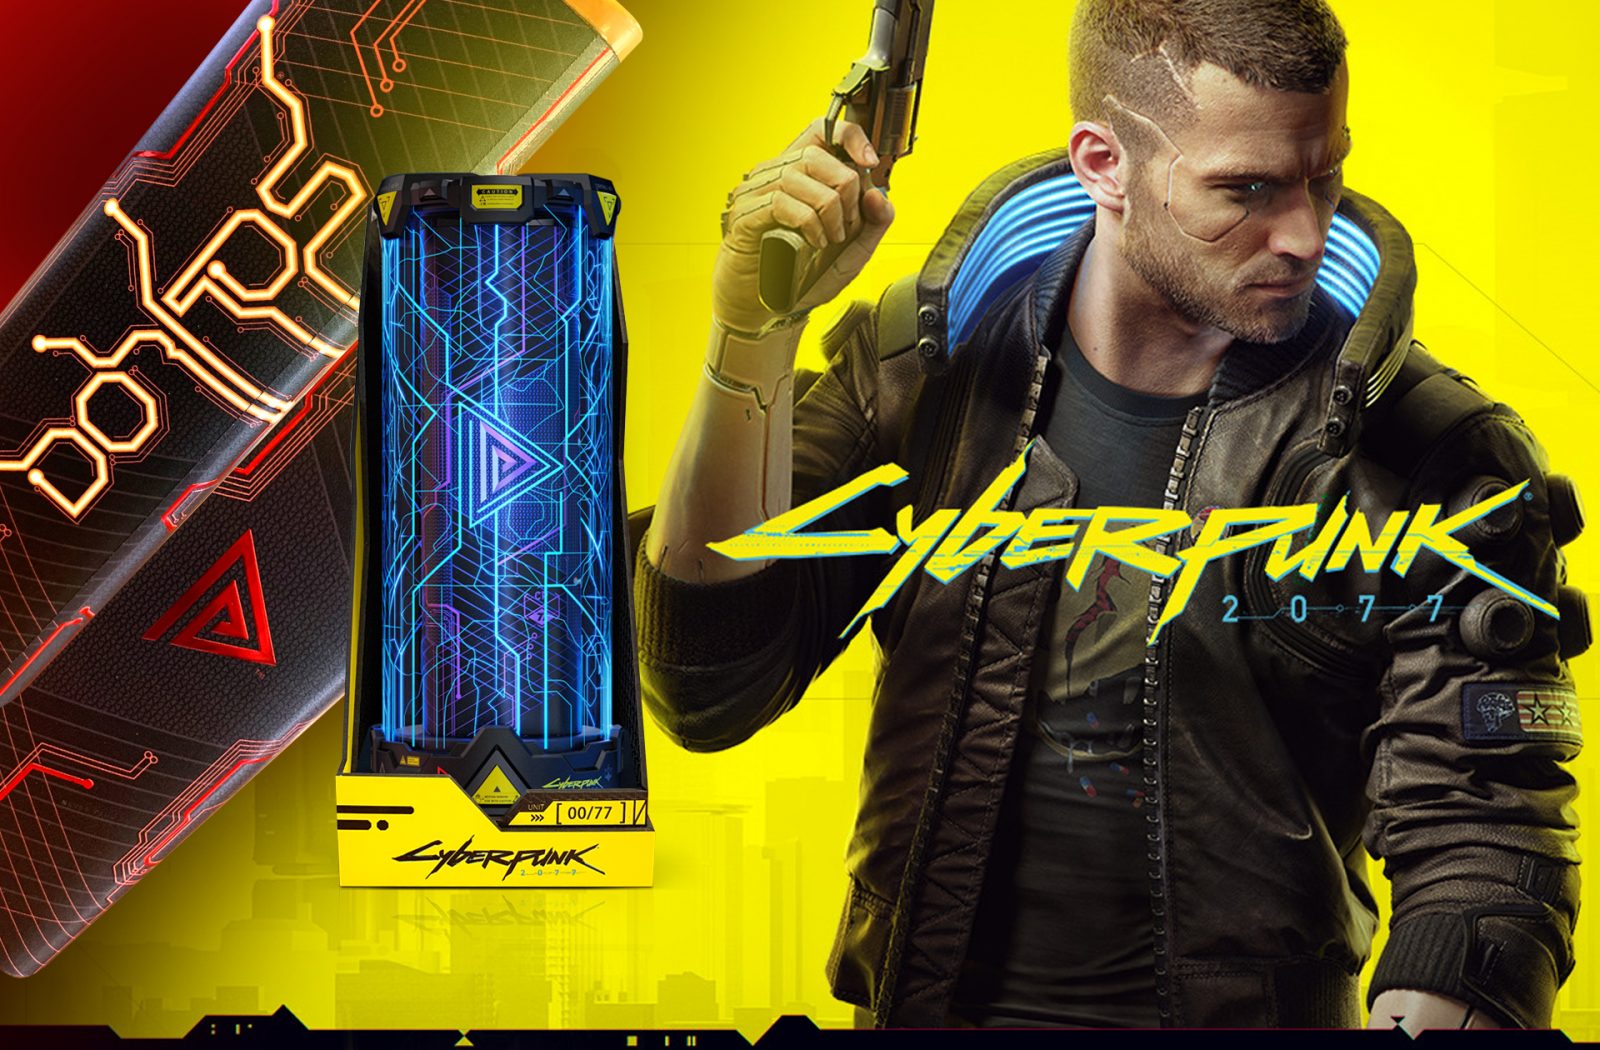 Collage image showcasing a fuel cell themed influencer unboxing experience promoting Cyberpunk 2077 and Doritos.